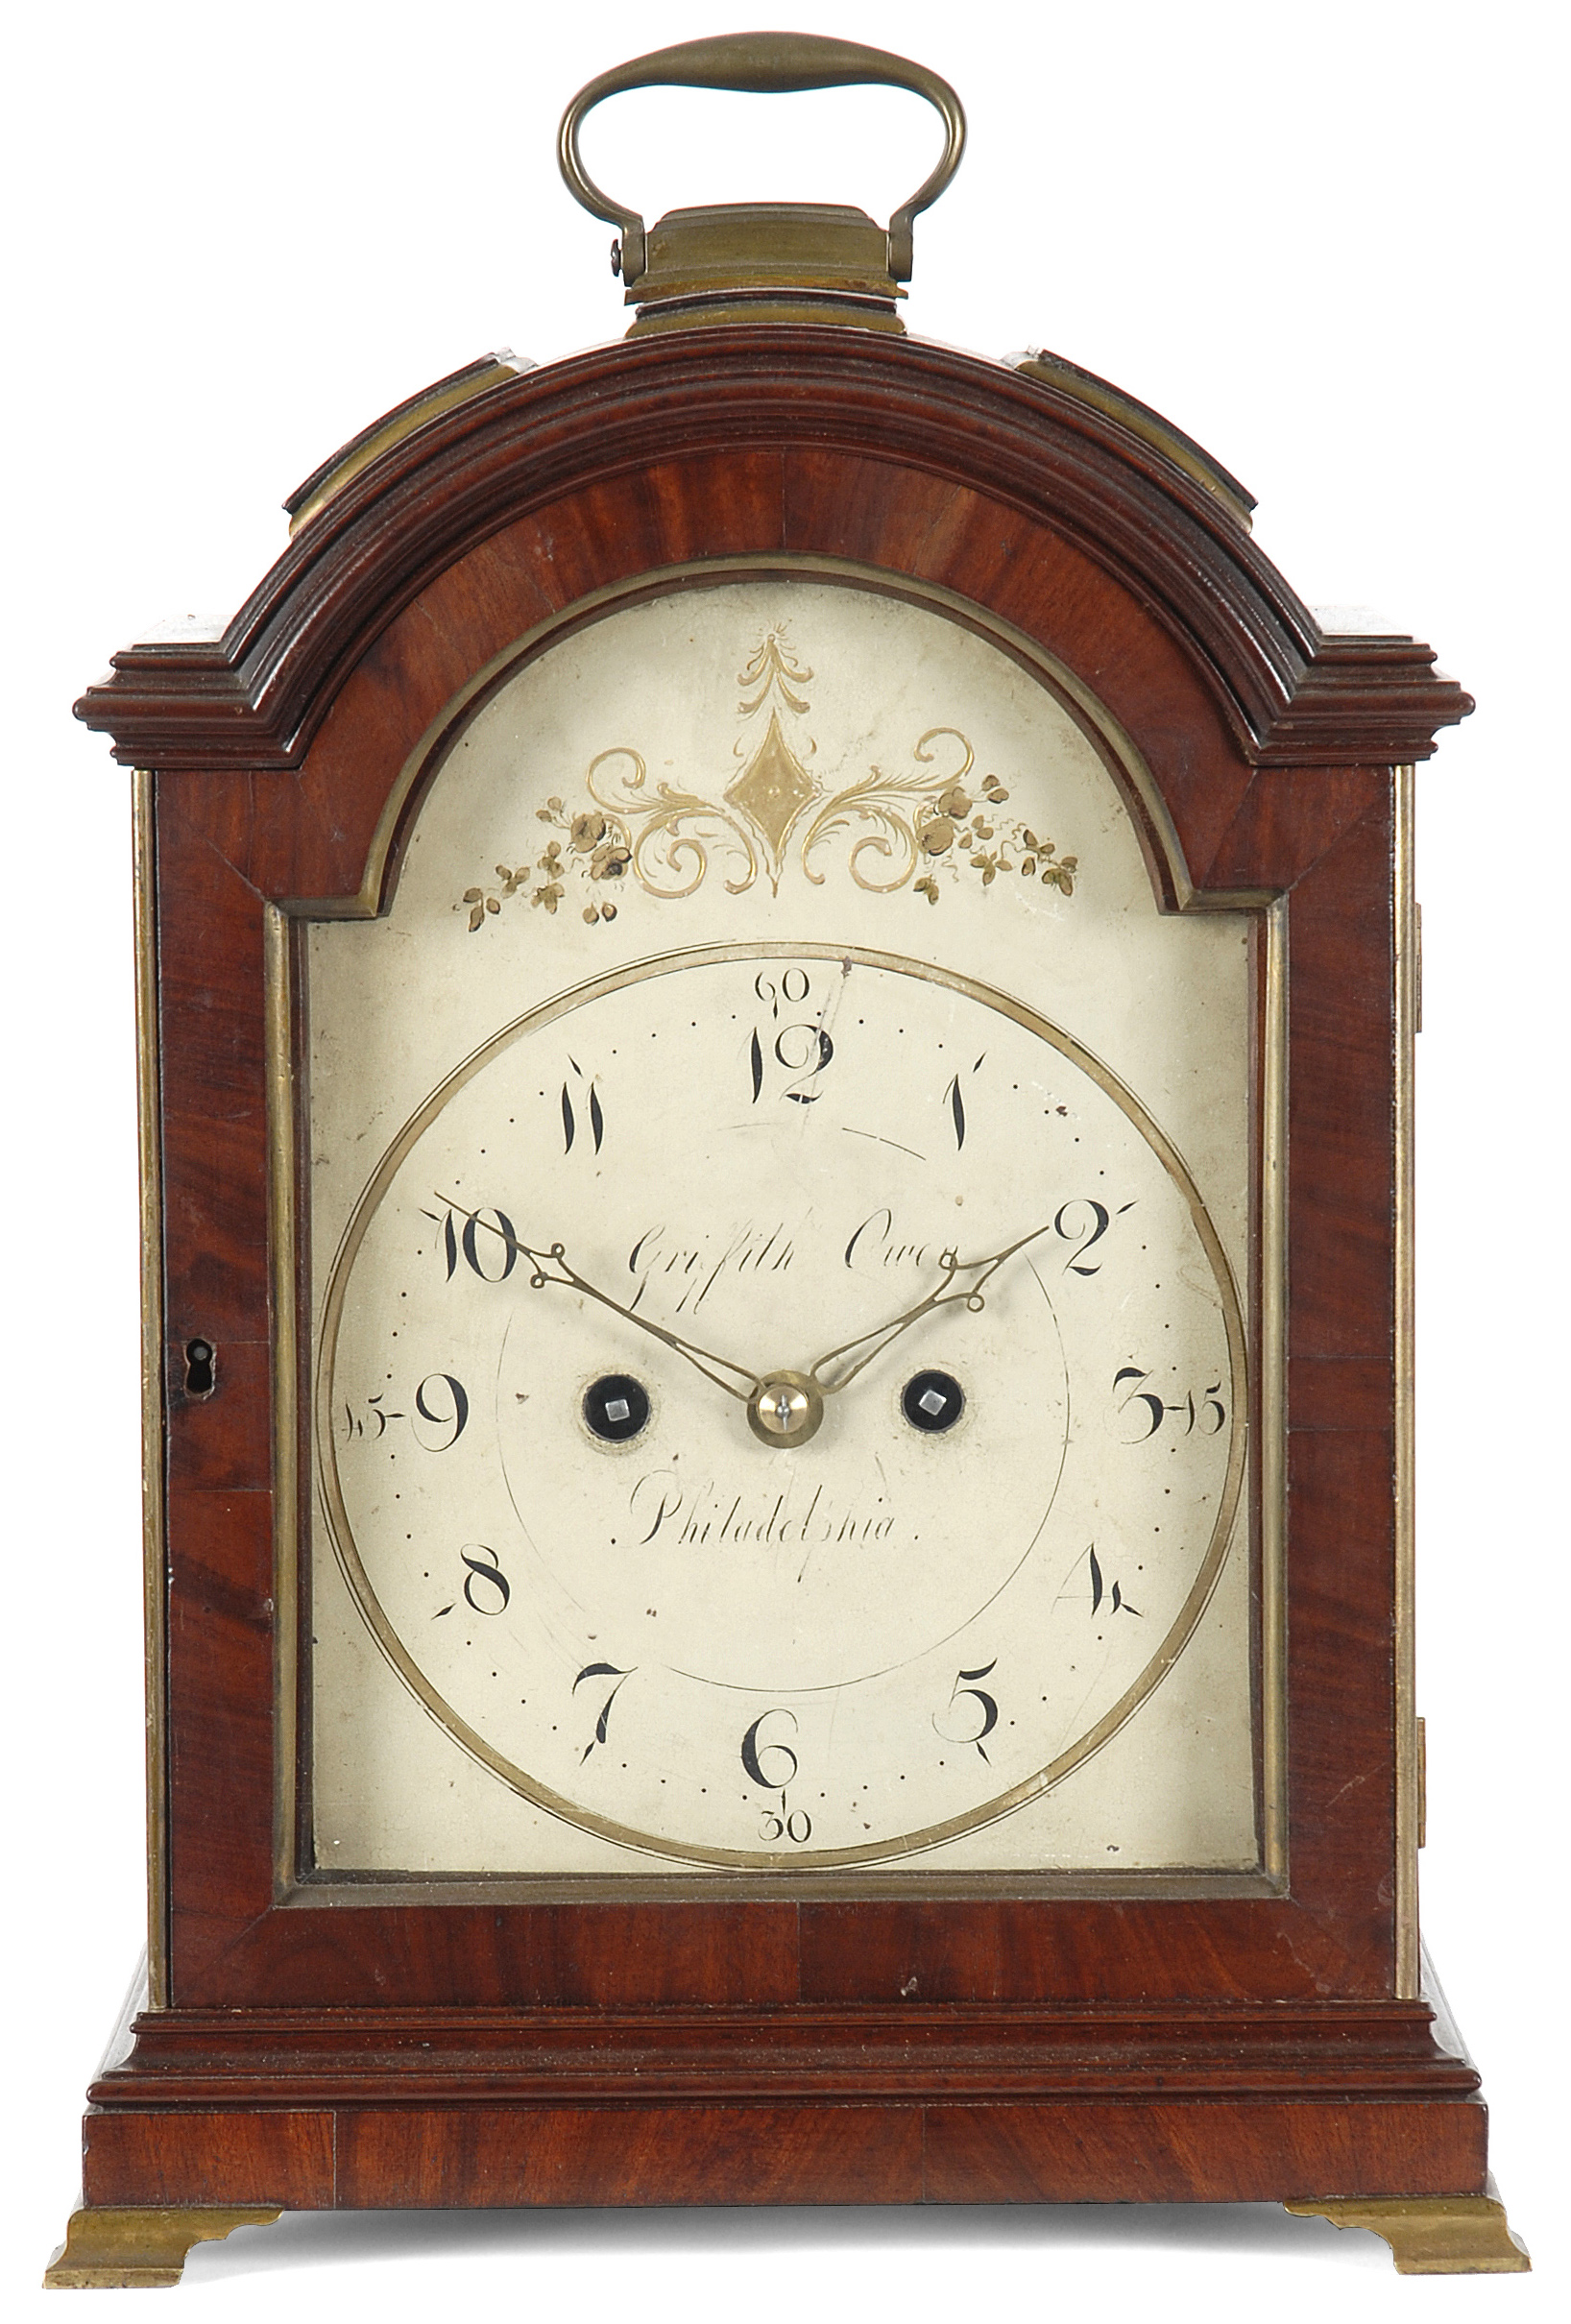 A Rare and Important American-Made Chippendale Mahogany  Bracket Clock, By Griffith Owen, Philadelphia, Pennsylvania, Circa 1790.